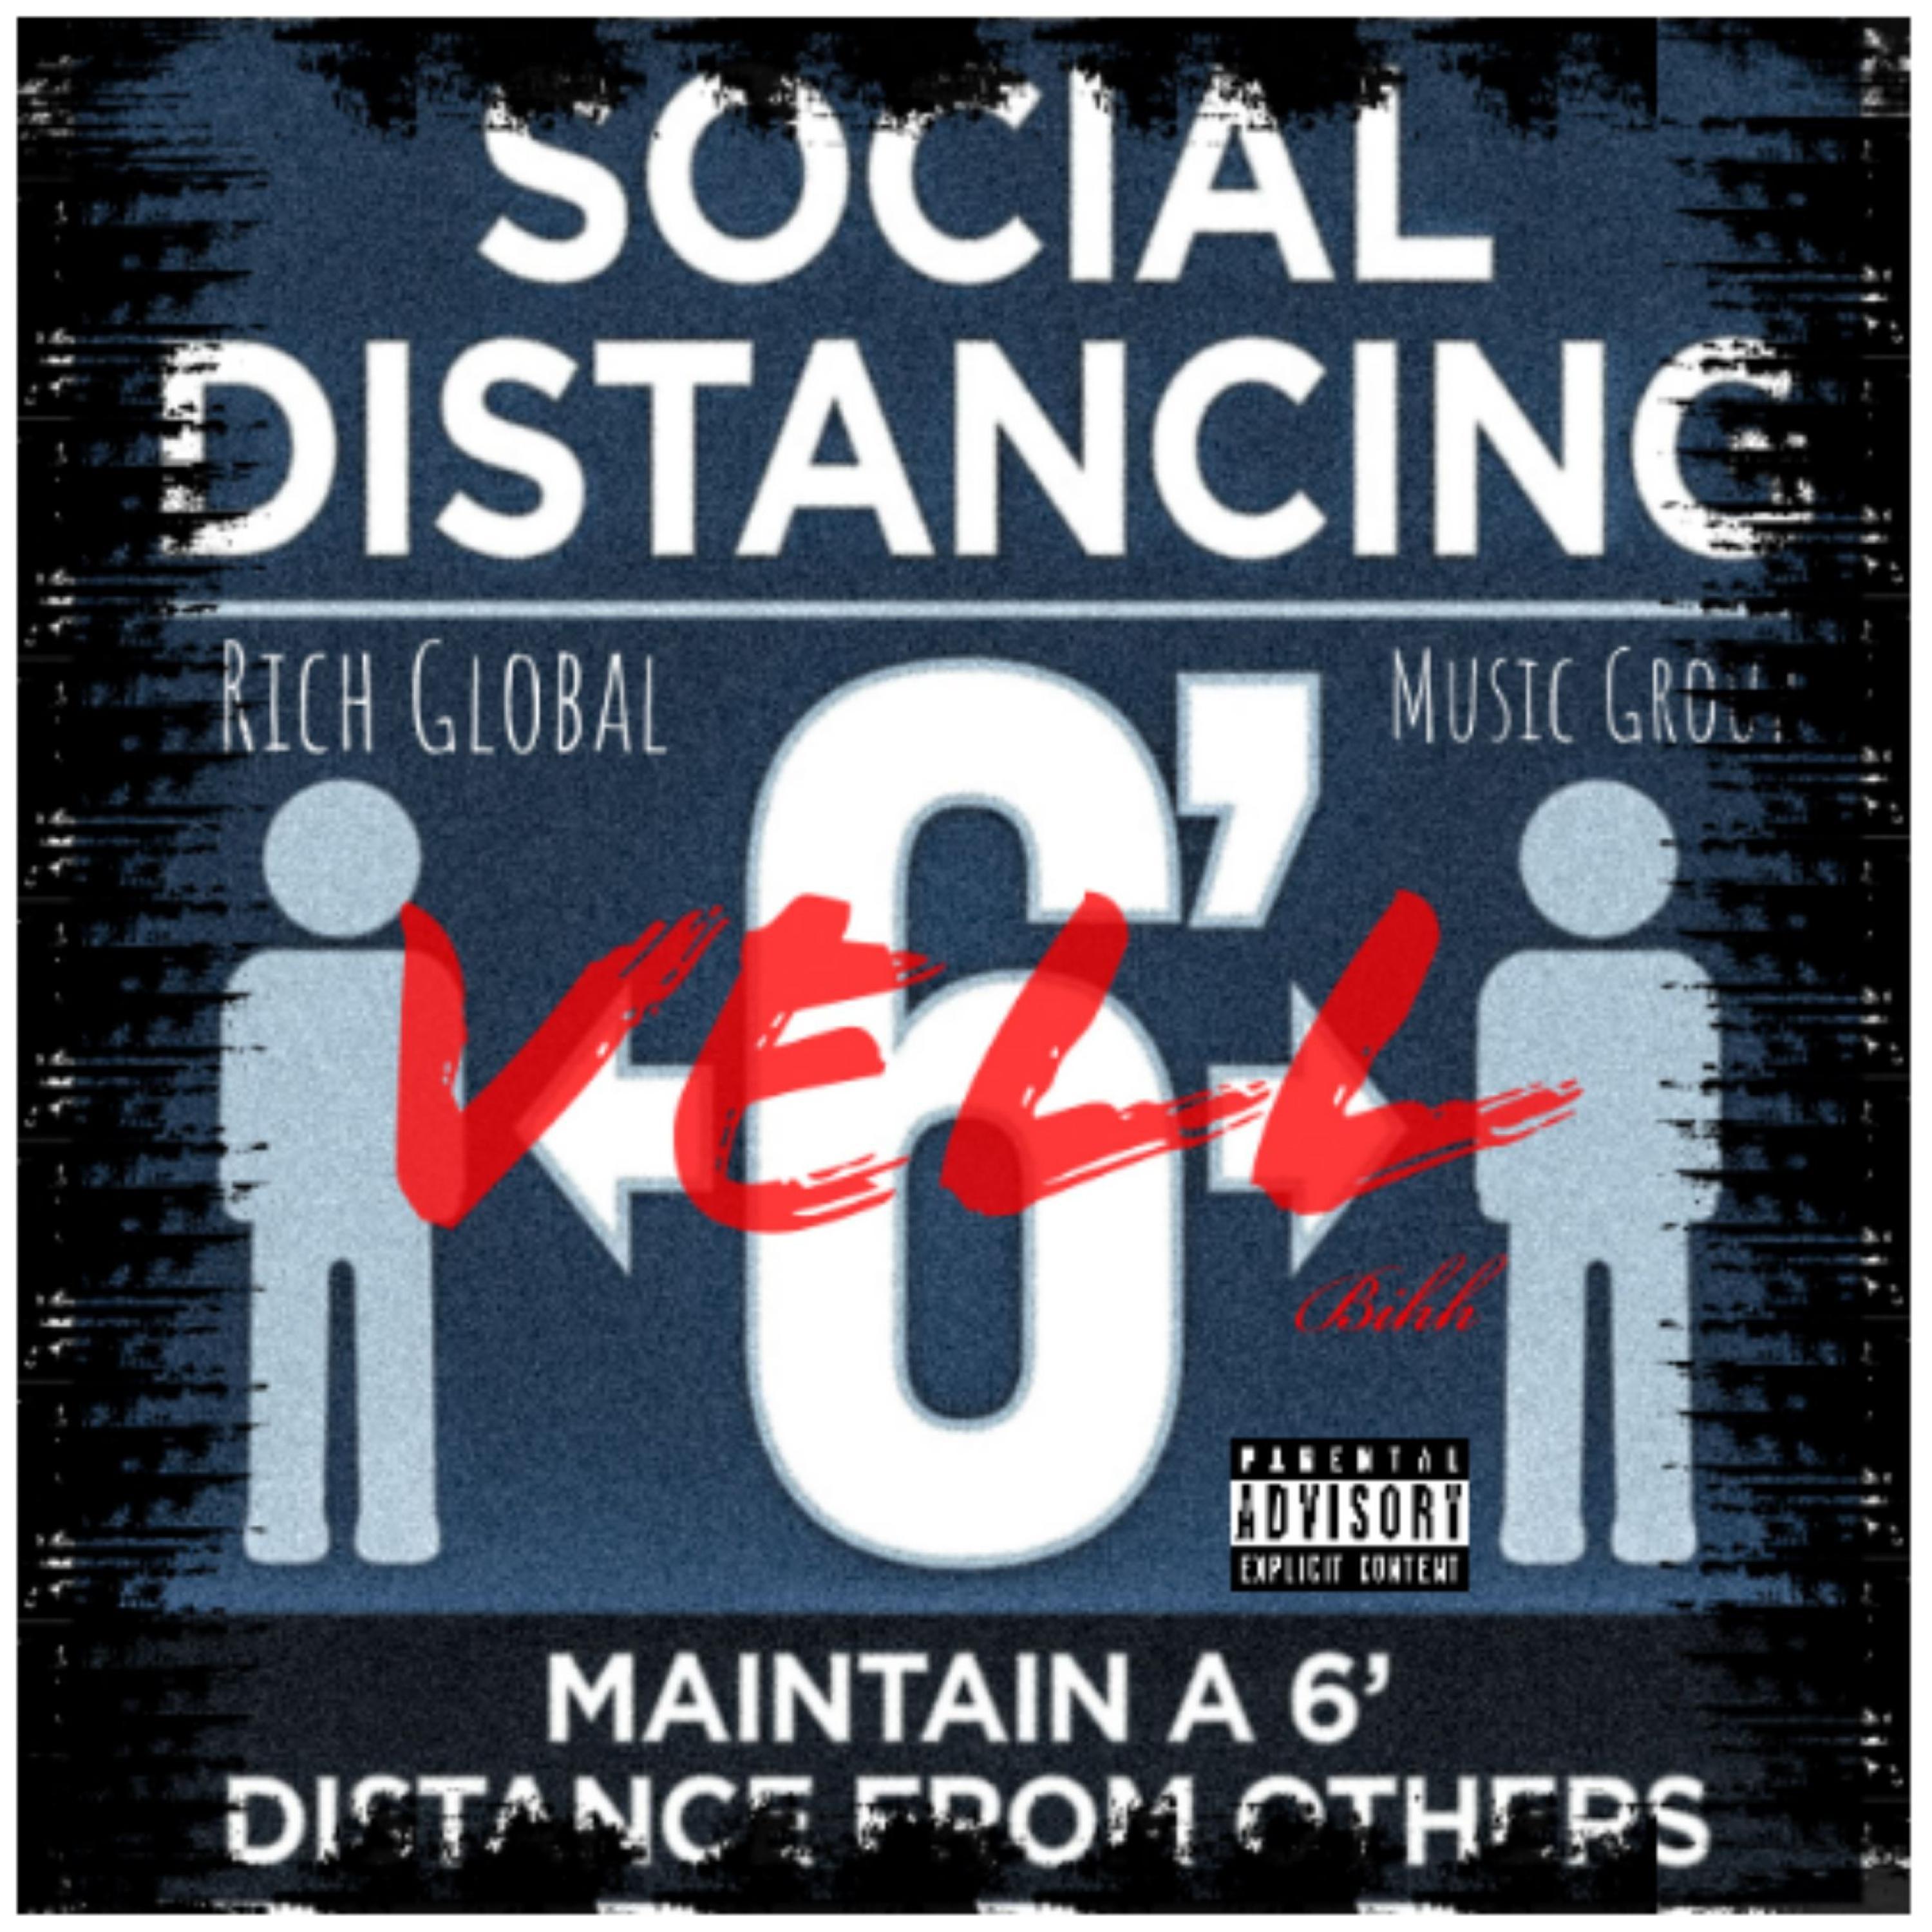 Vell - Social Distancing